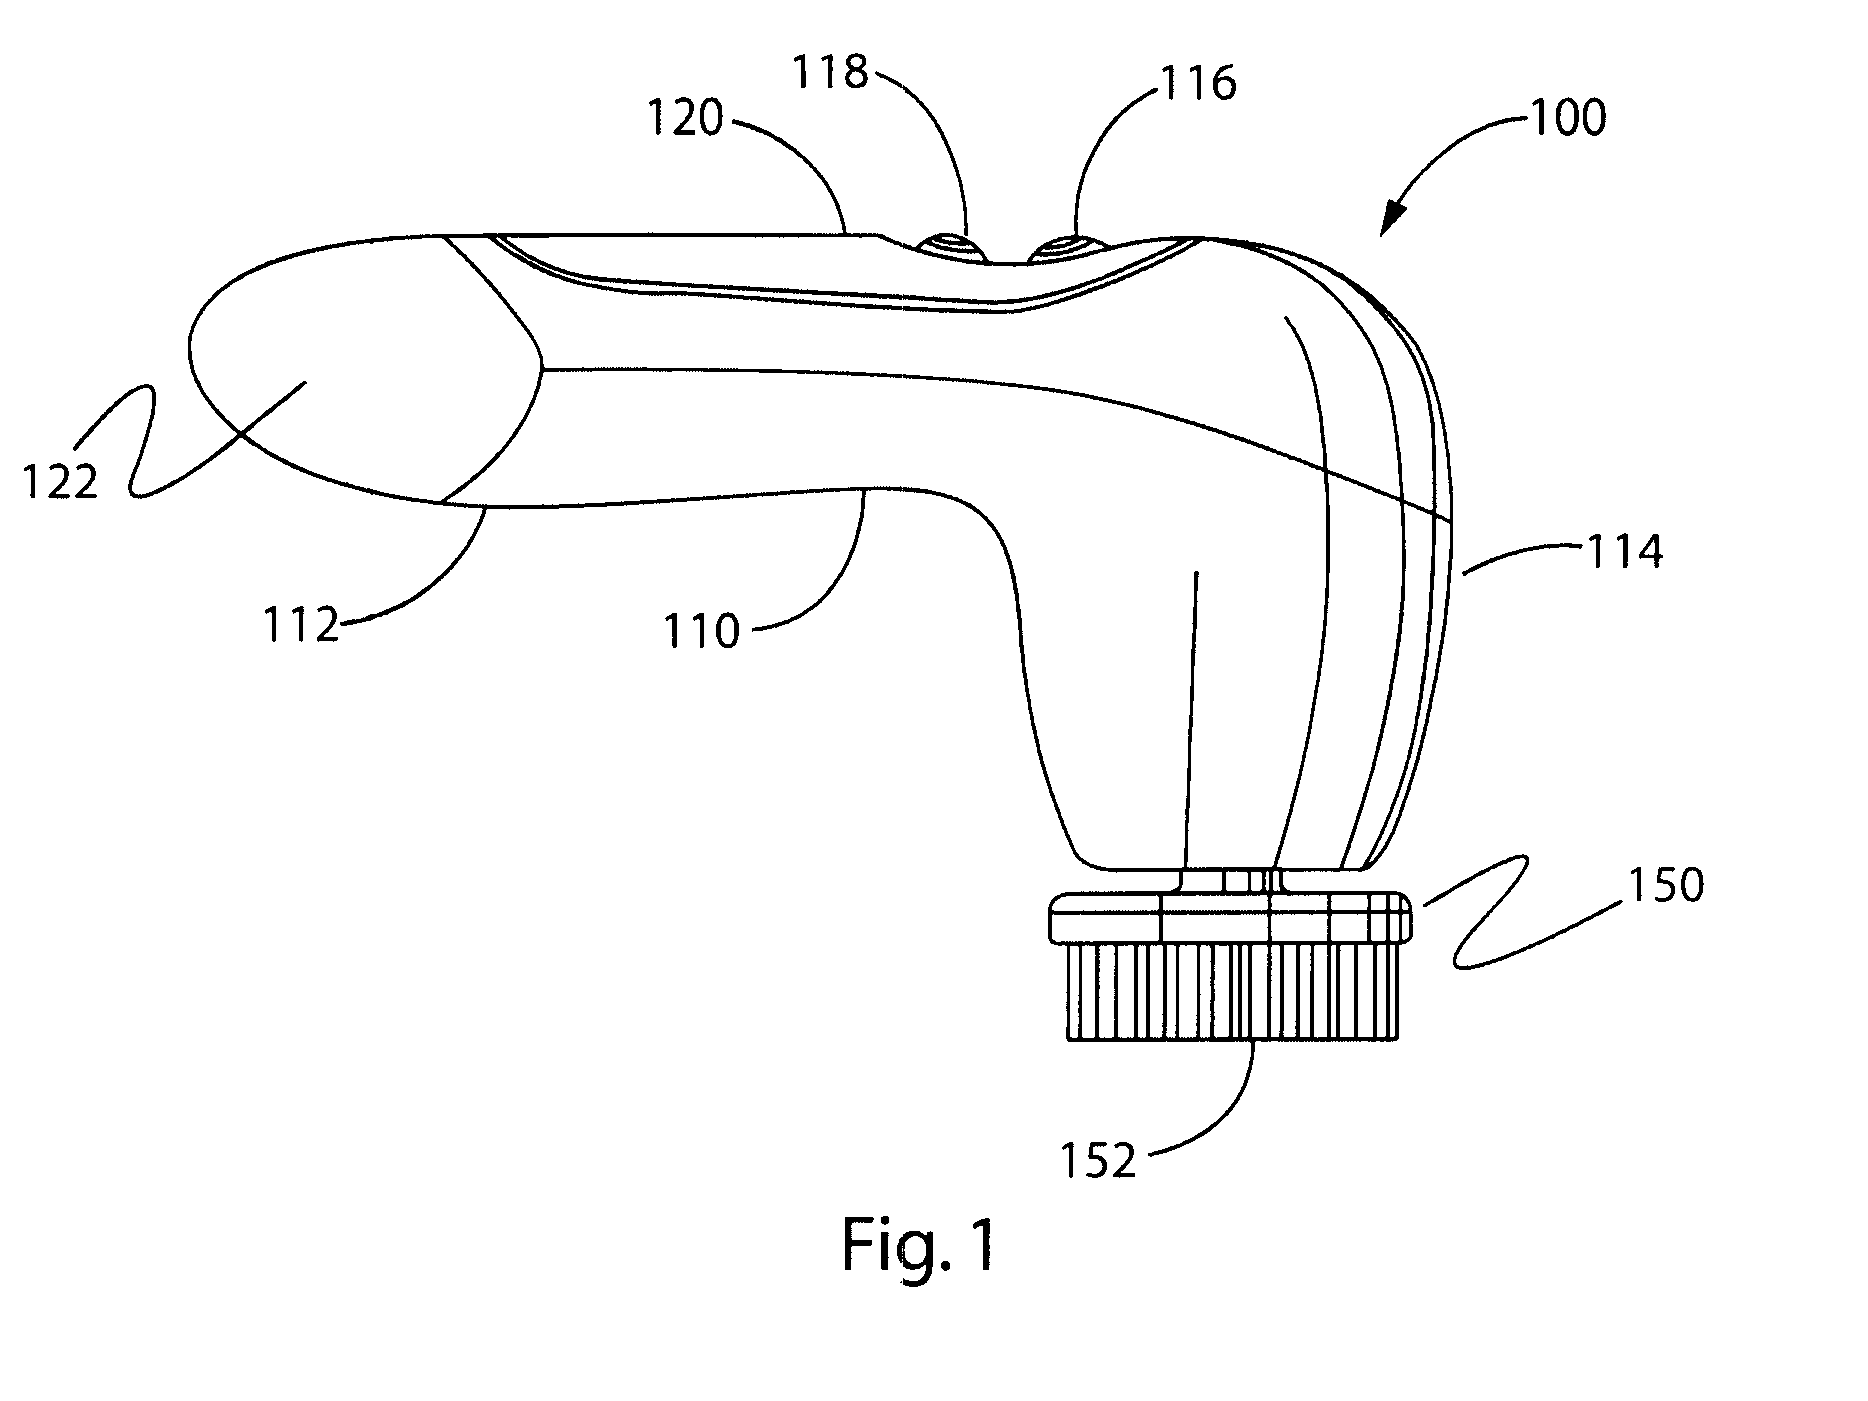 Method Of Regulating Anaerobic Bacteria Load On a Skin Surface